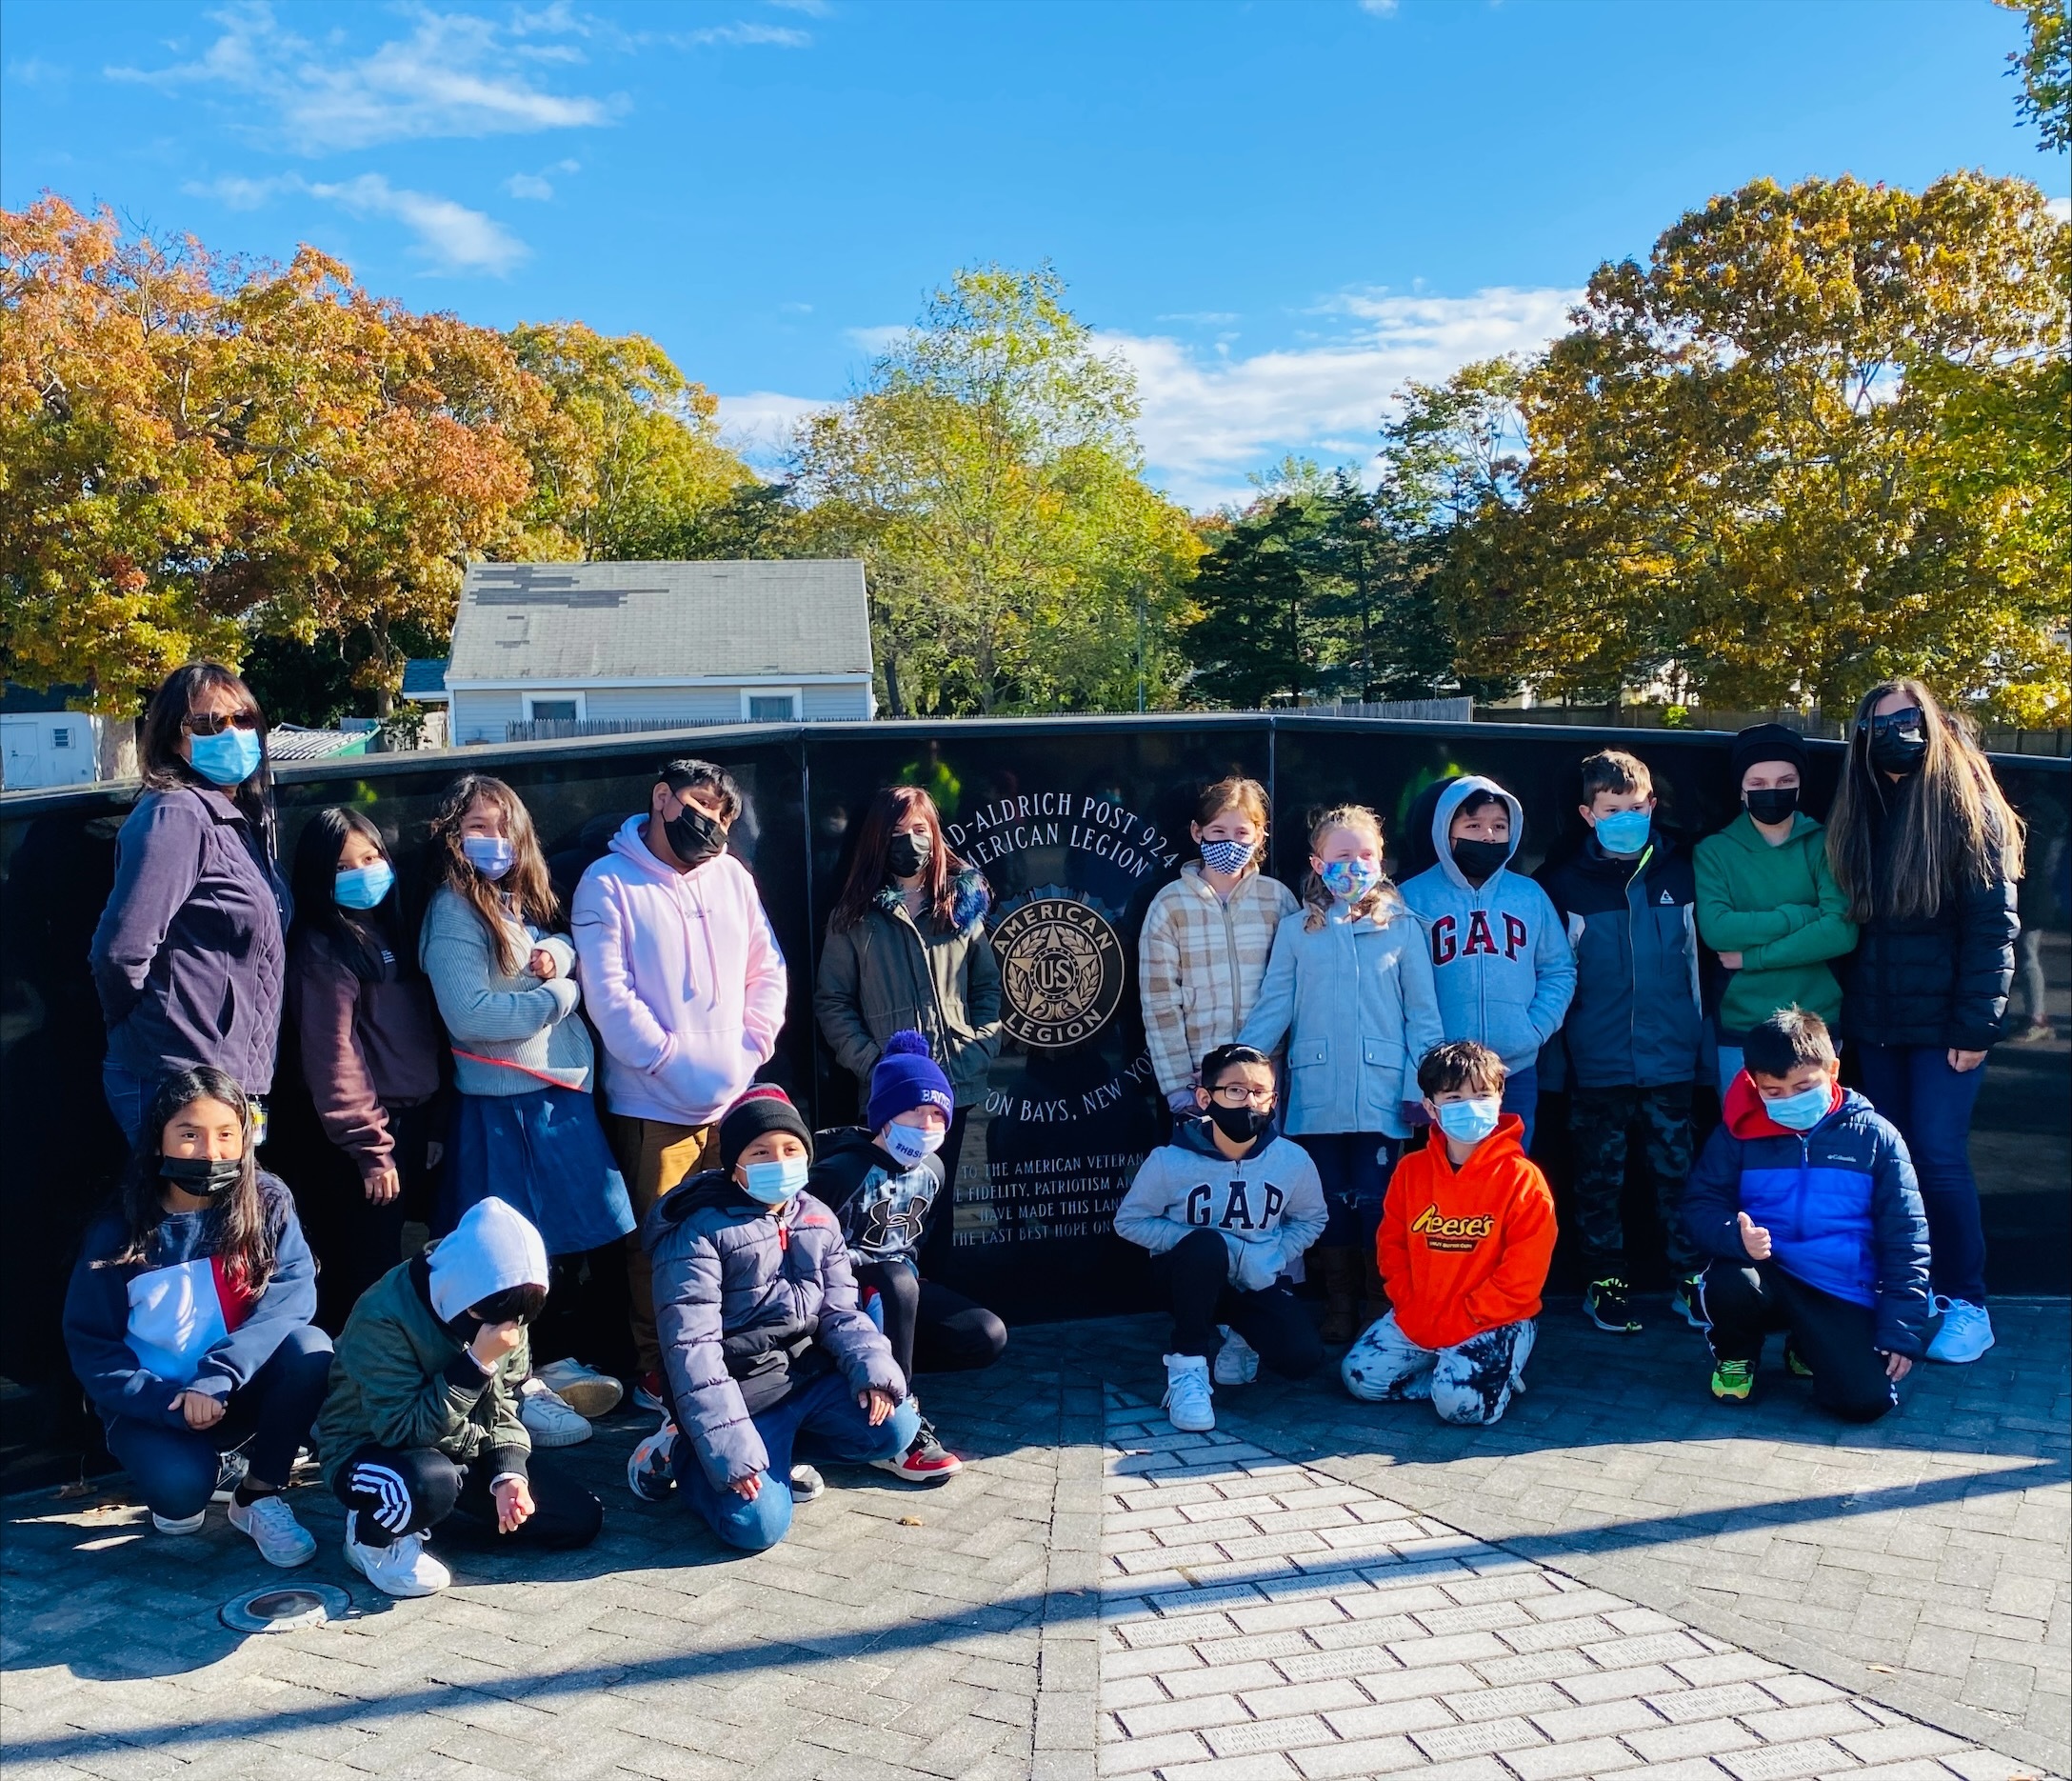 As part of their social studies curriculum, Hampton Bays Elementary School fourth grade students recently visited the American Legion Post 924. During the tour, the students heard from local veterans about their experiences in the military and why it’s important to honor veterans and thank the brave men and women who served and continue to serve.